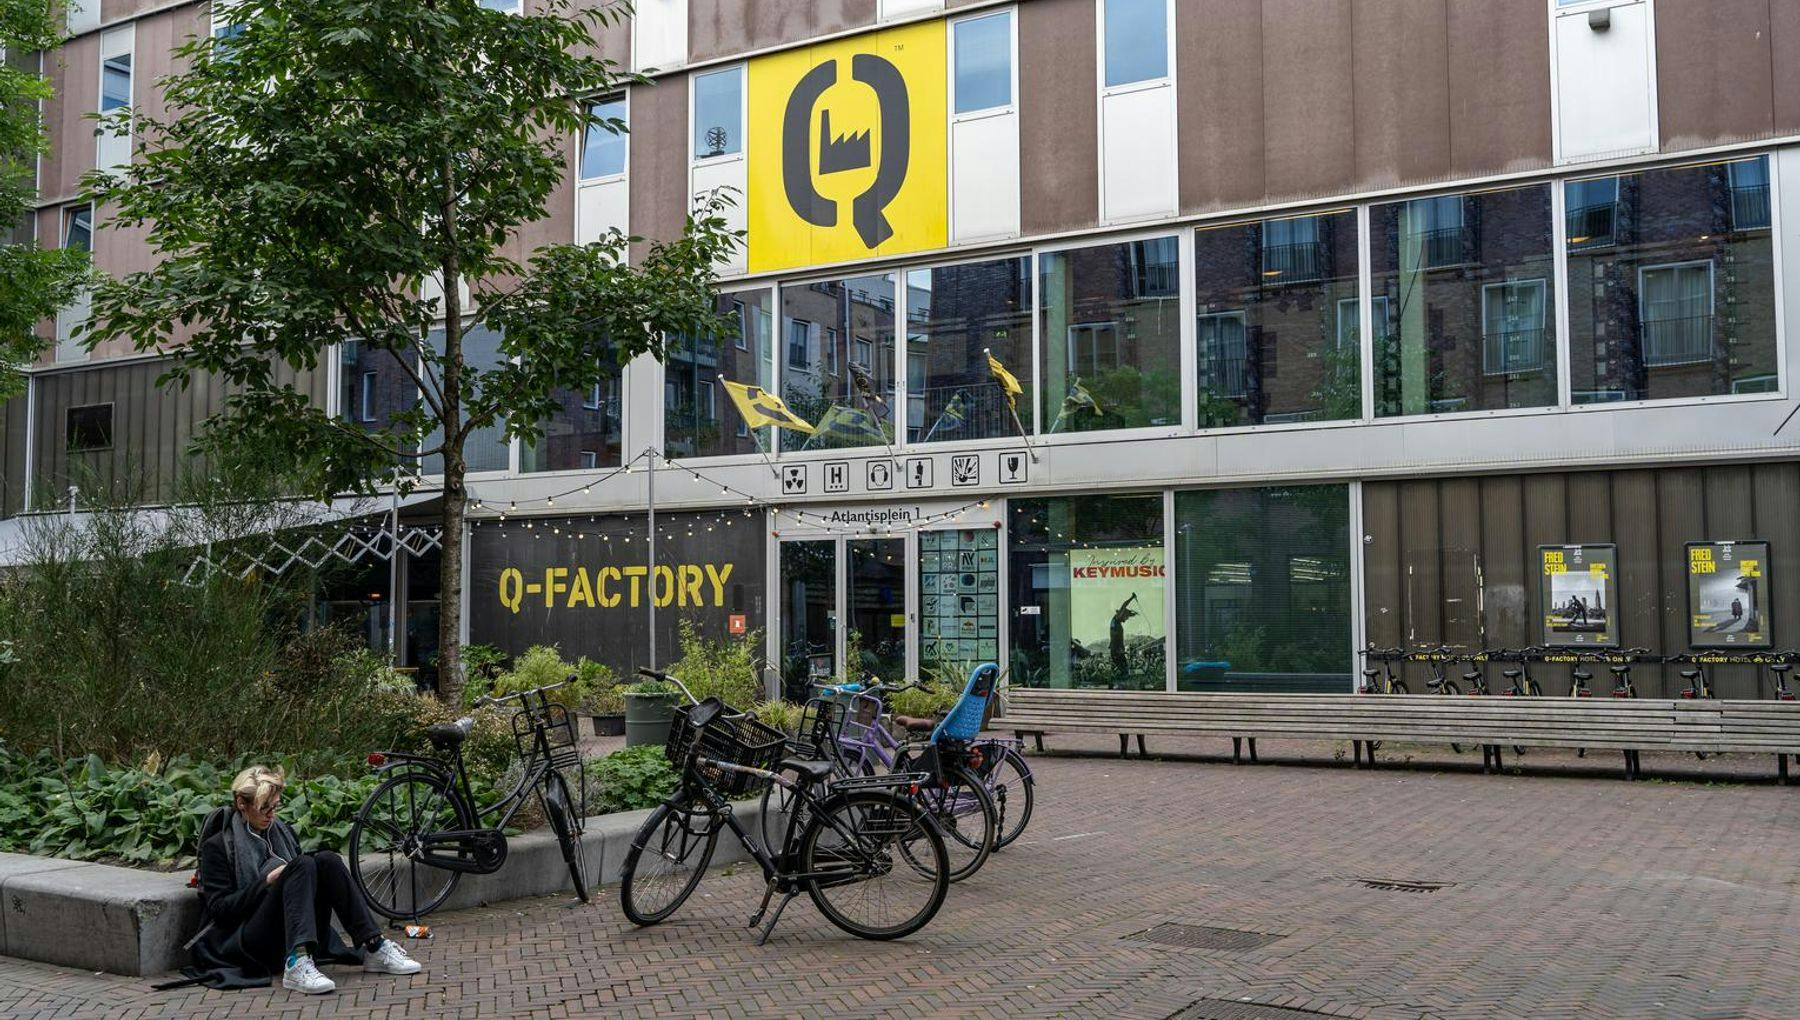 Q-Factory - A cultural hotspot for enjoying live music, drinking & dining, and spaces for artists to rehearse, create and record music.